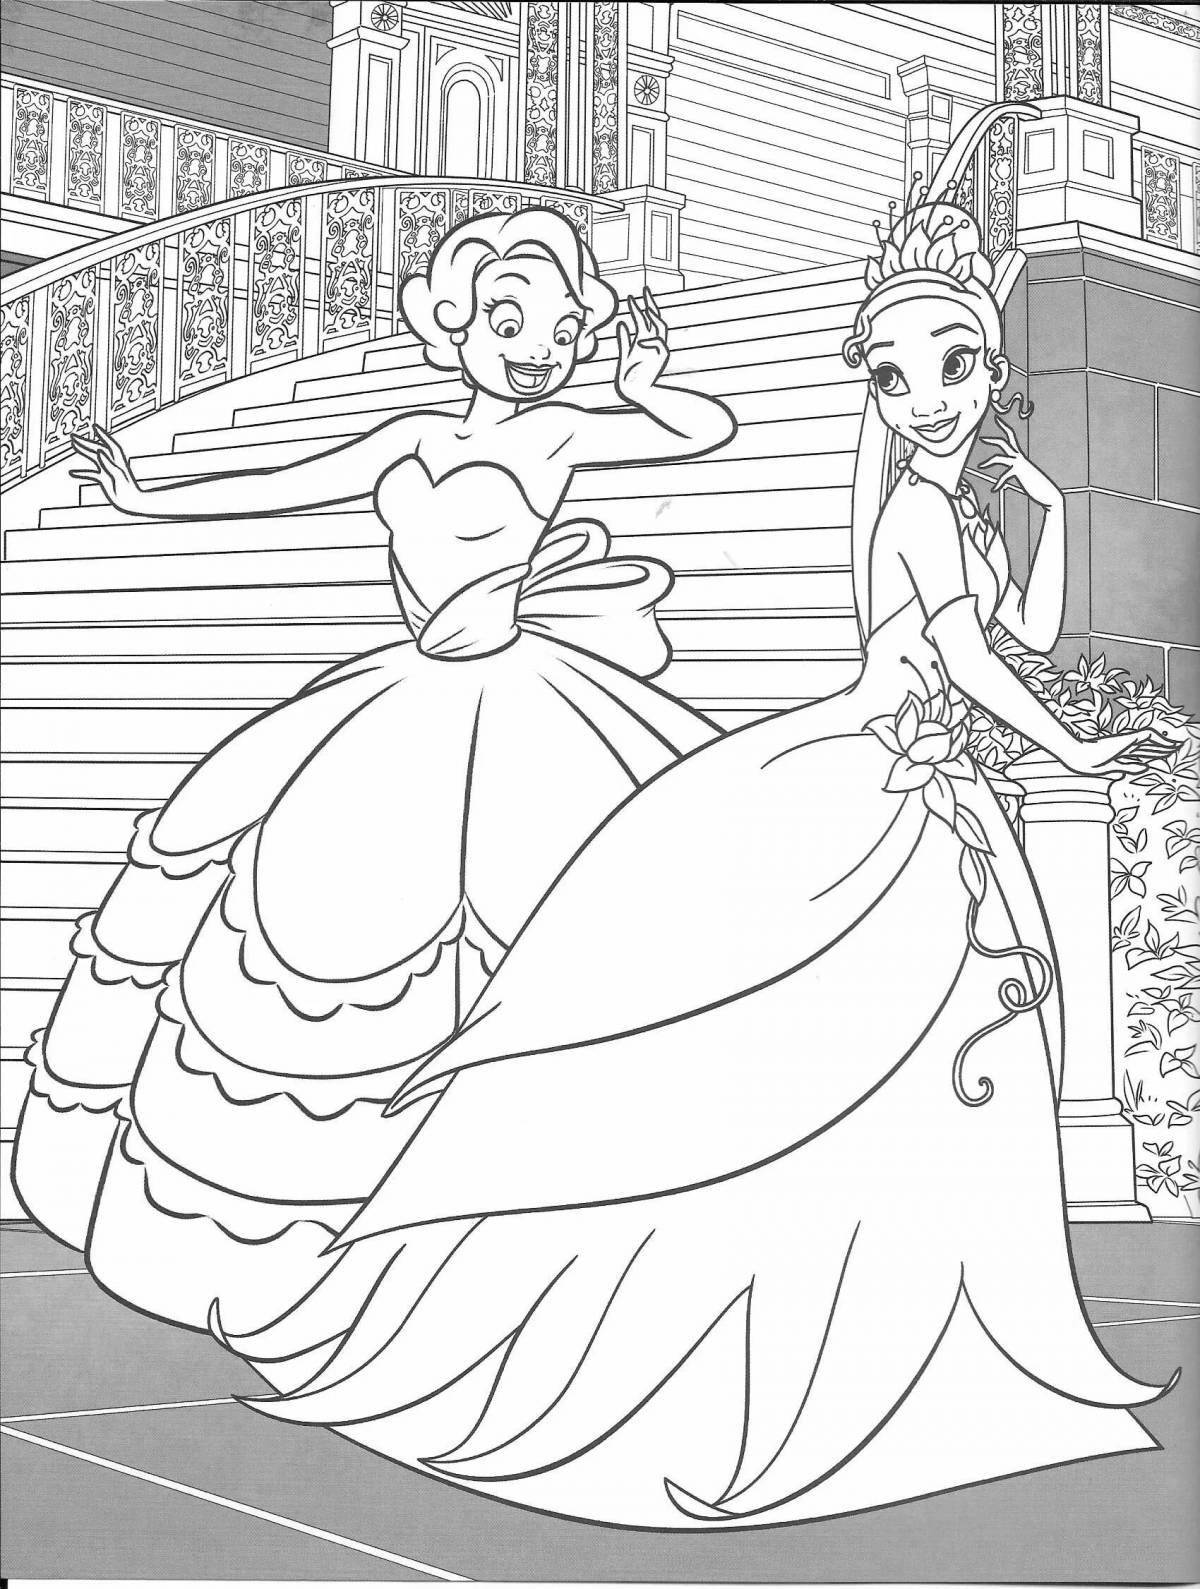 Coloring page energetic tiana